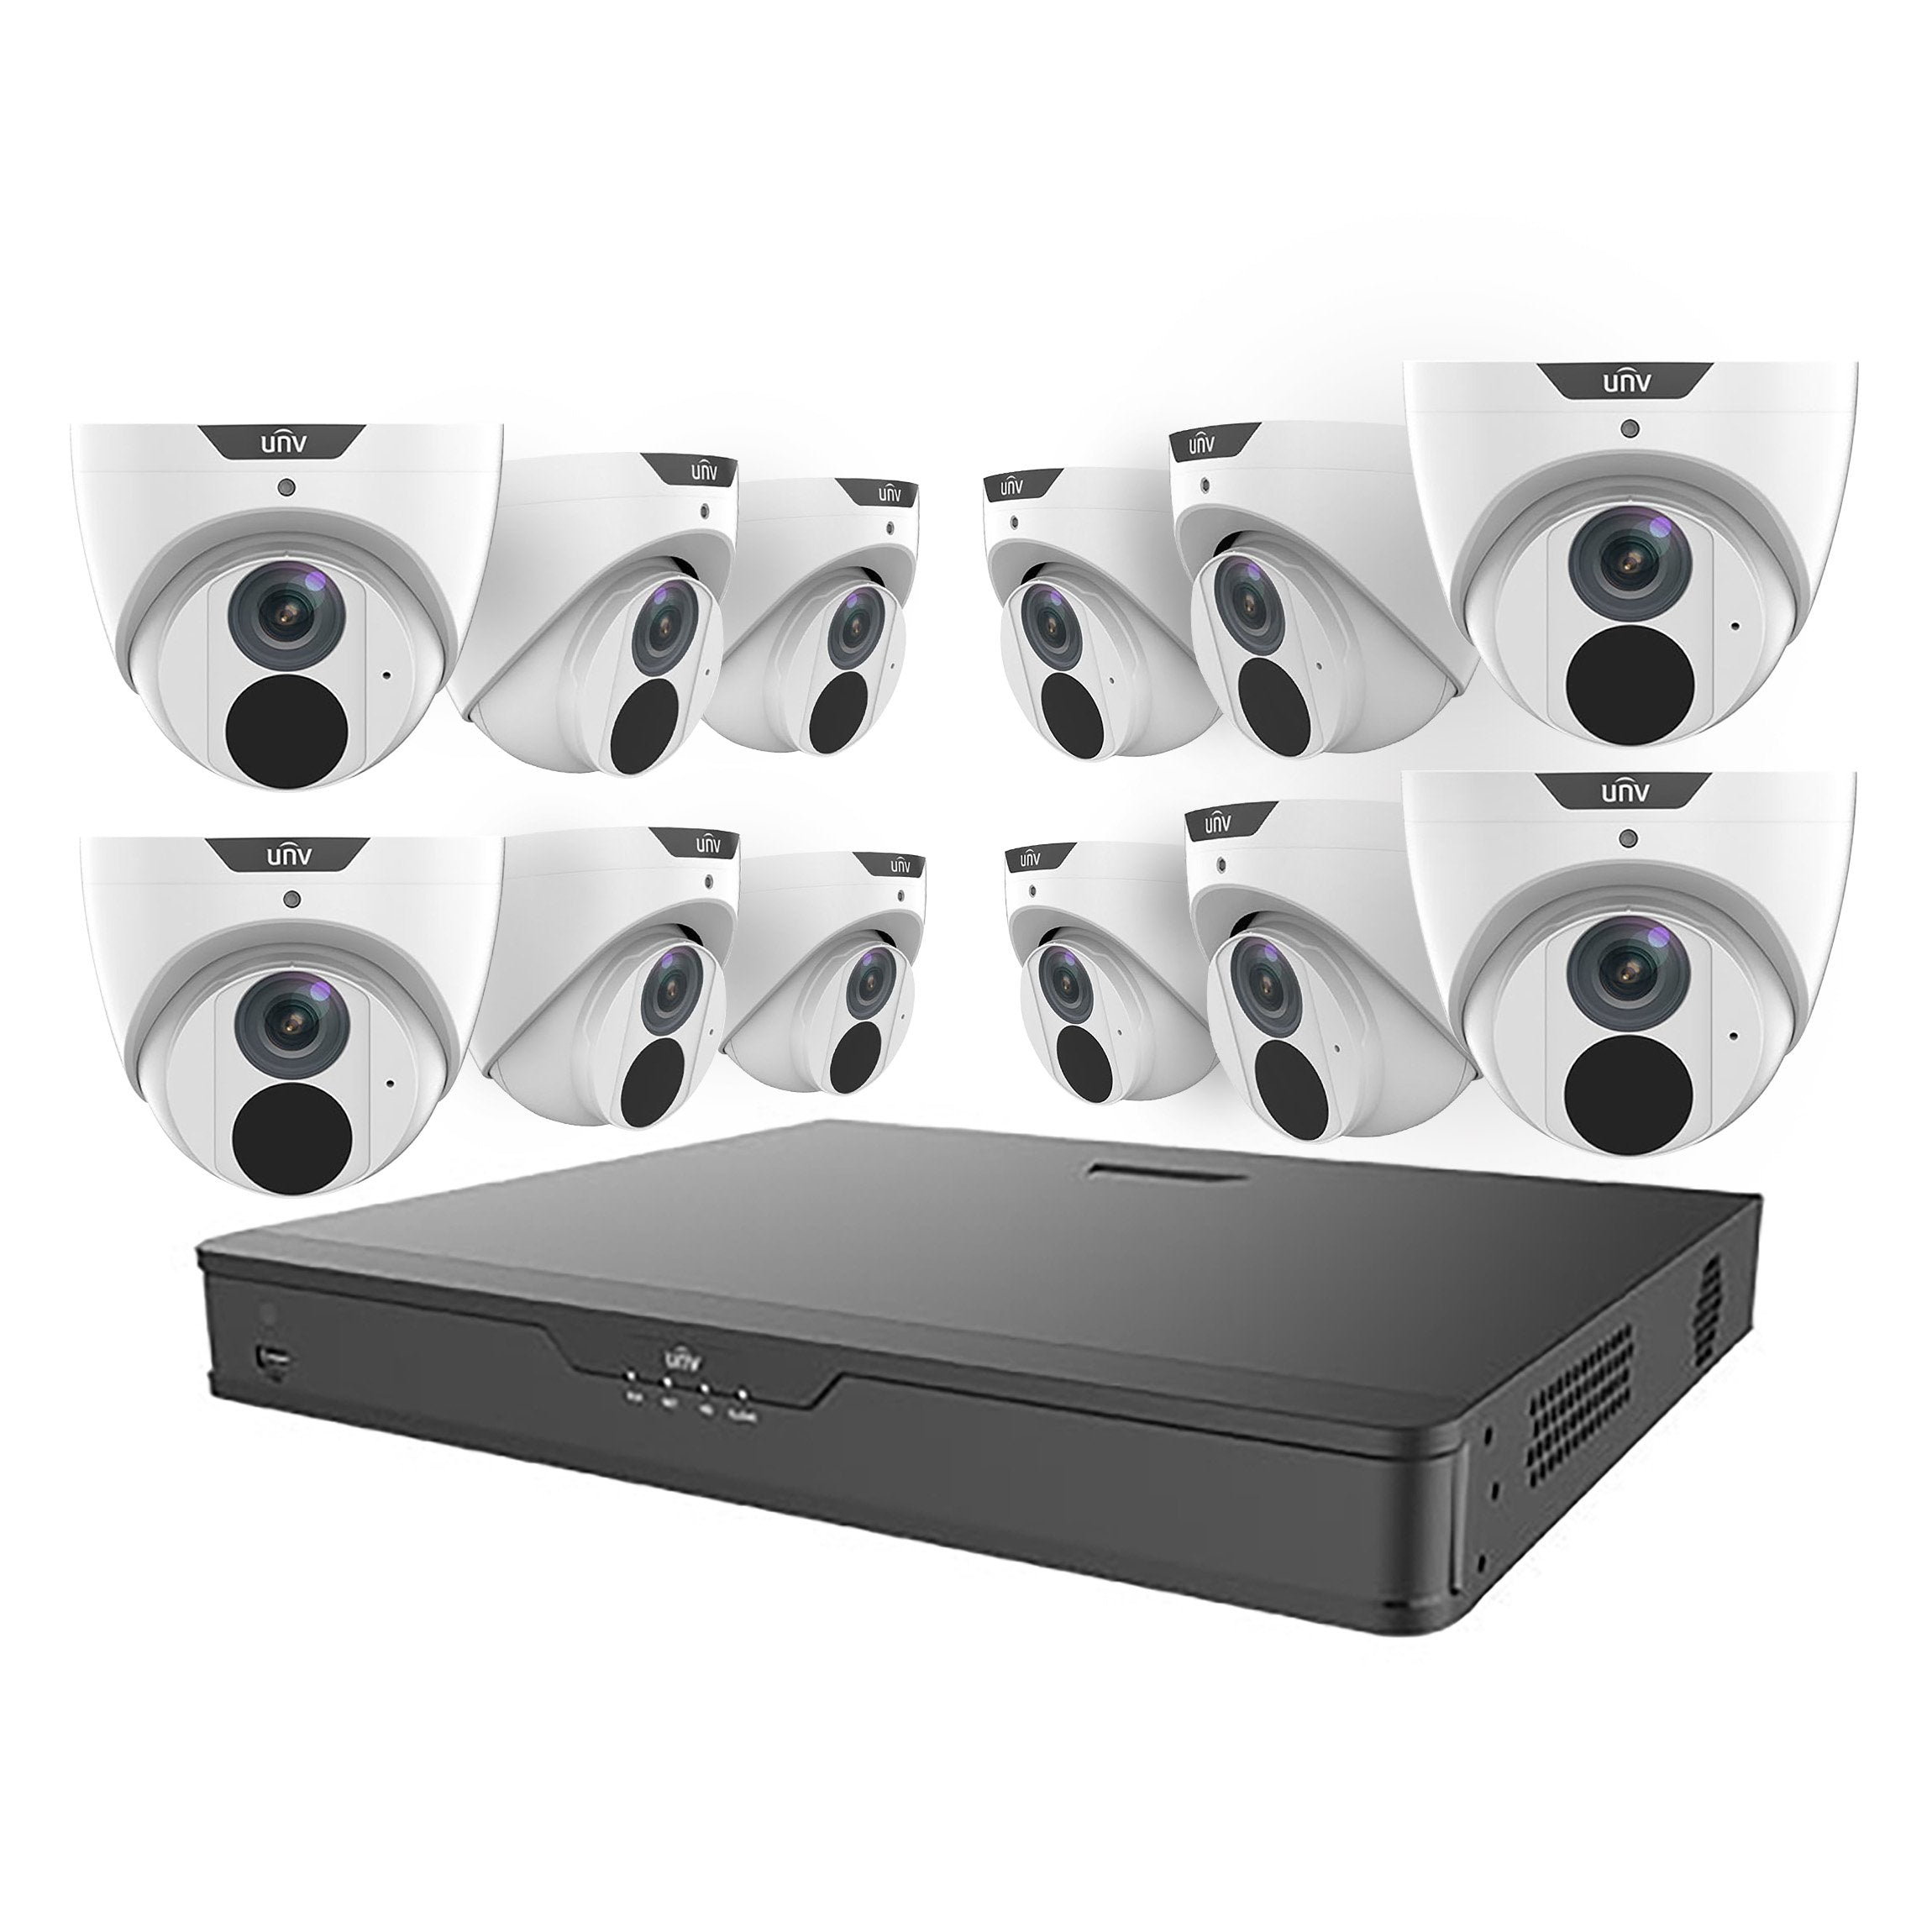 Uniview 16CH Easy Series 6MP Turret Kit - 1 x NVR302-16E2-P16-4TB, 12 x IPC3616LE-ADF28KM | Low Light, 2.8mm, 120dB WDR, 30m IR, Built-in Mic, IP67 (Wall Mount: TR-WM03-B-IN, Junction Box: TR-JB03-G-IN)